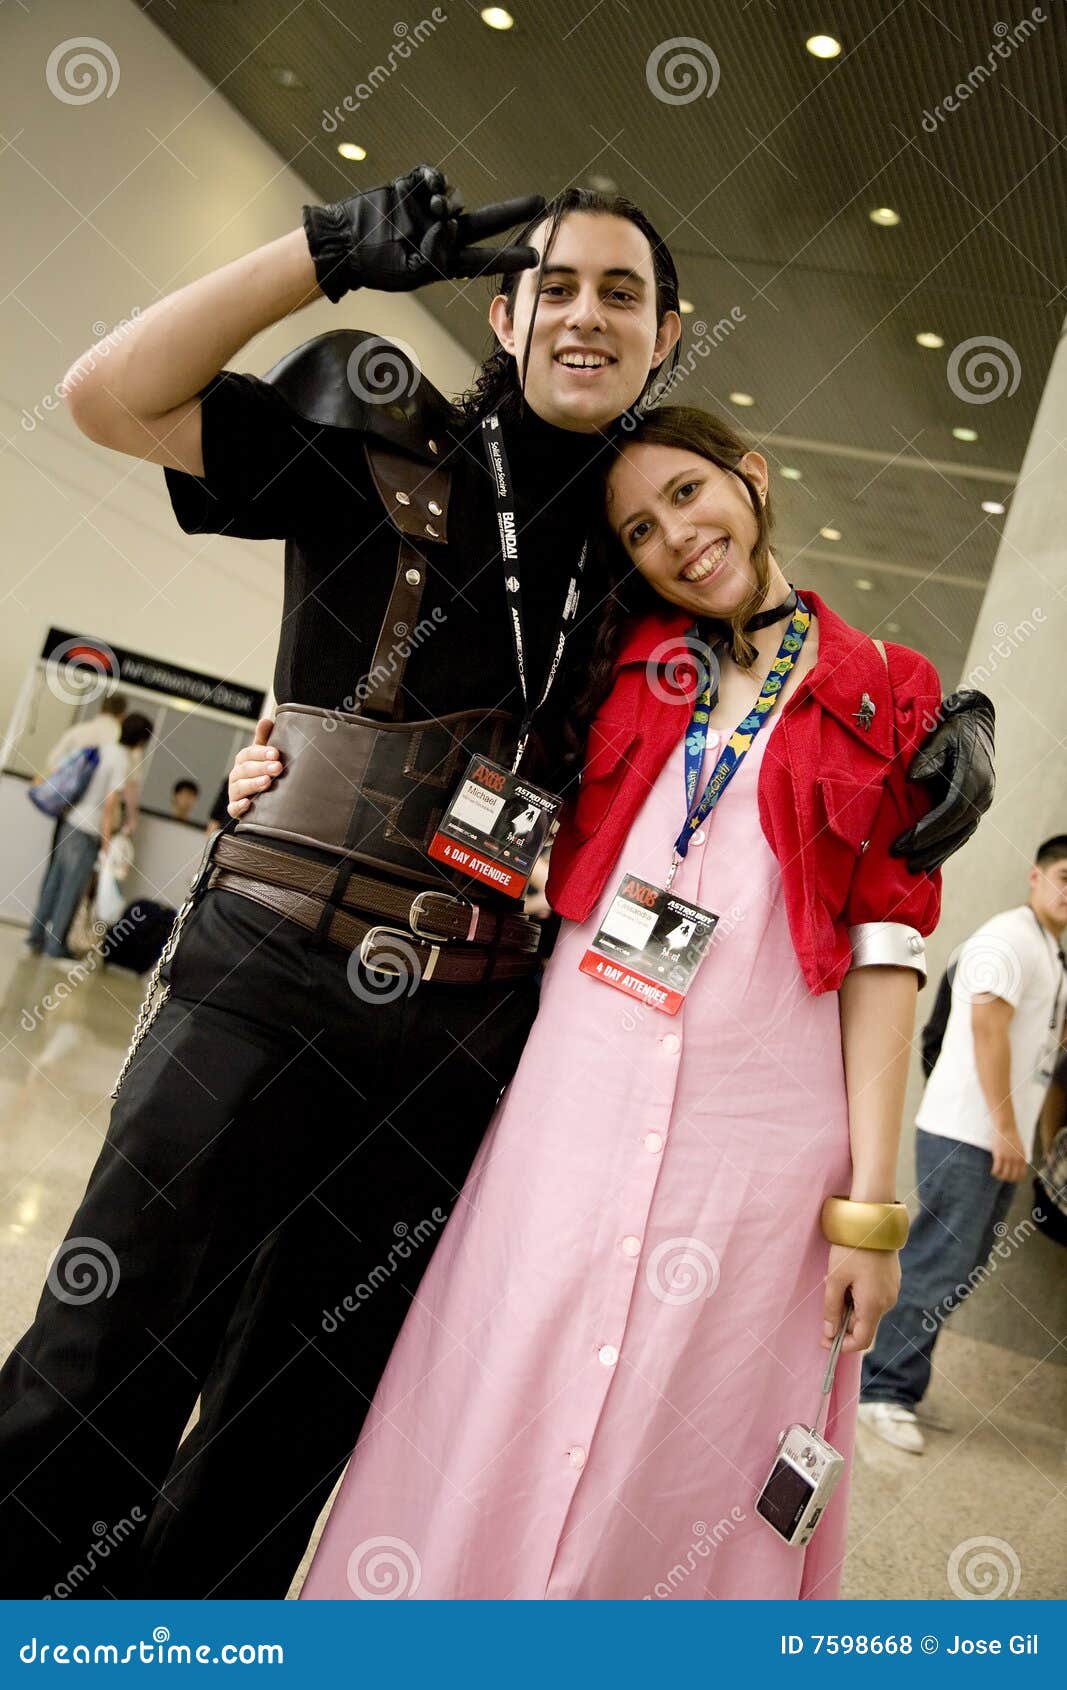 Details more than 74 anime couples cosplay best - in.cdgdbentre